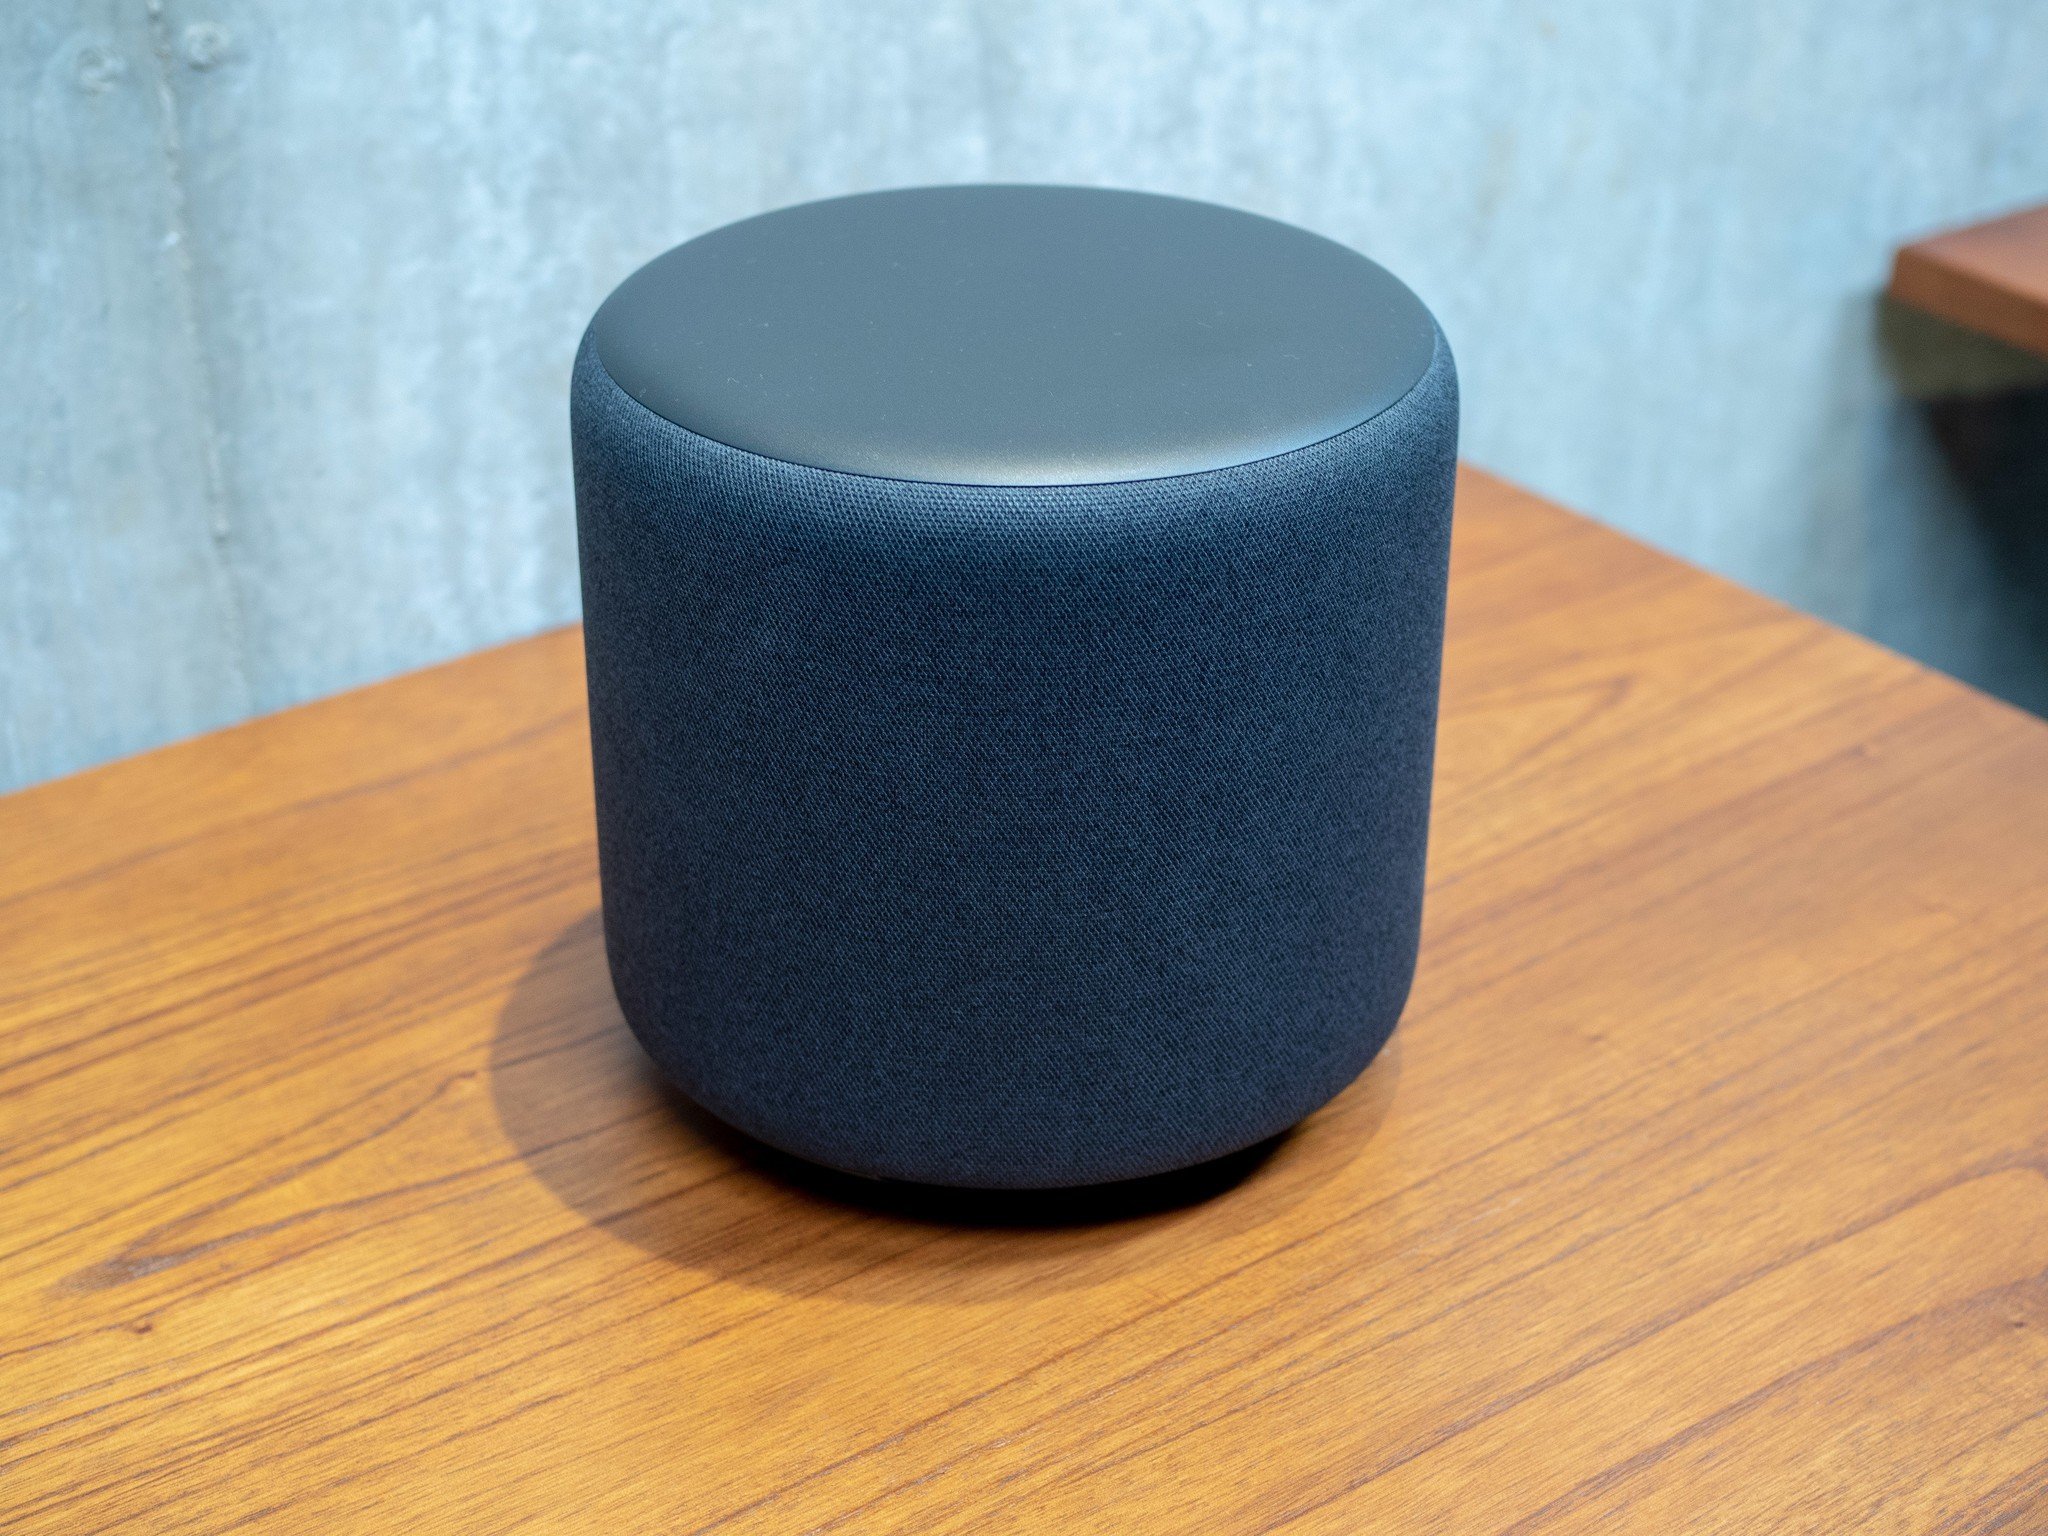 Echo subwoofer and Alexa-capable smart plug may be on the way